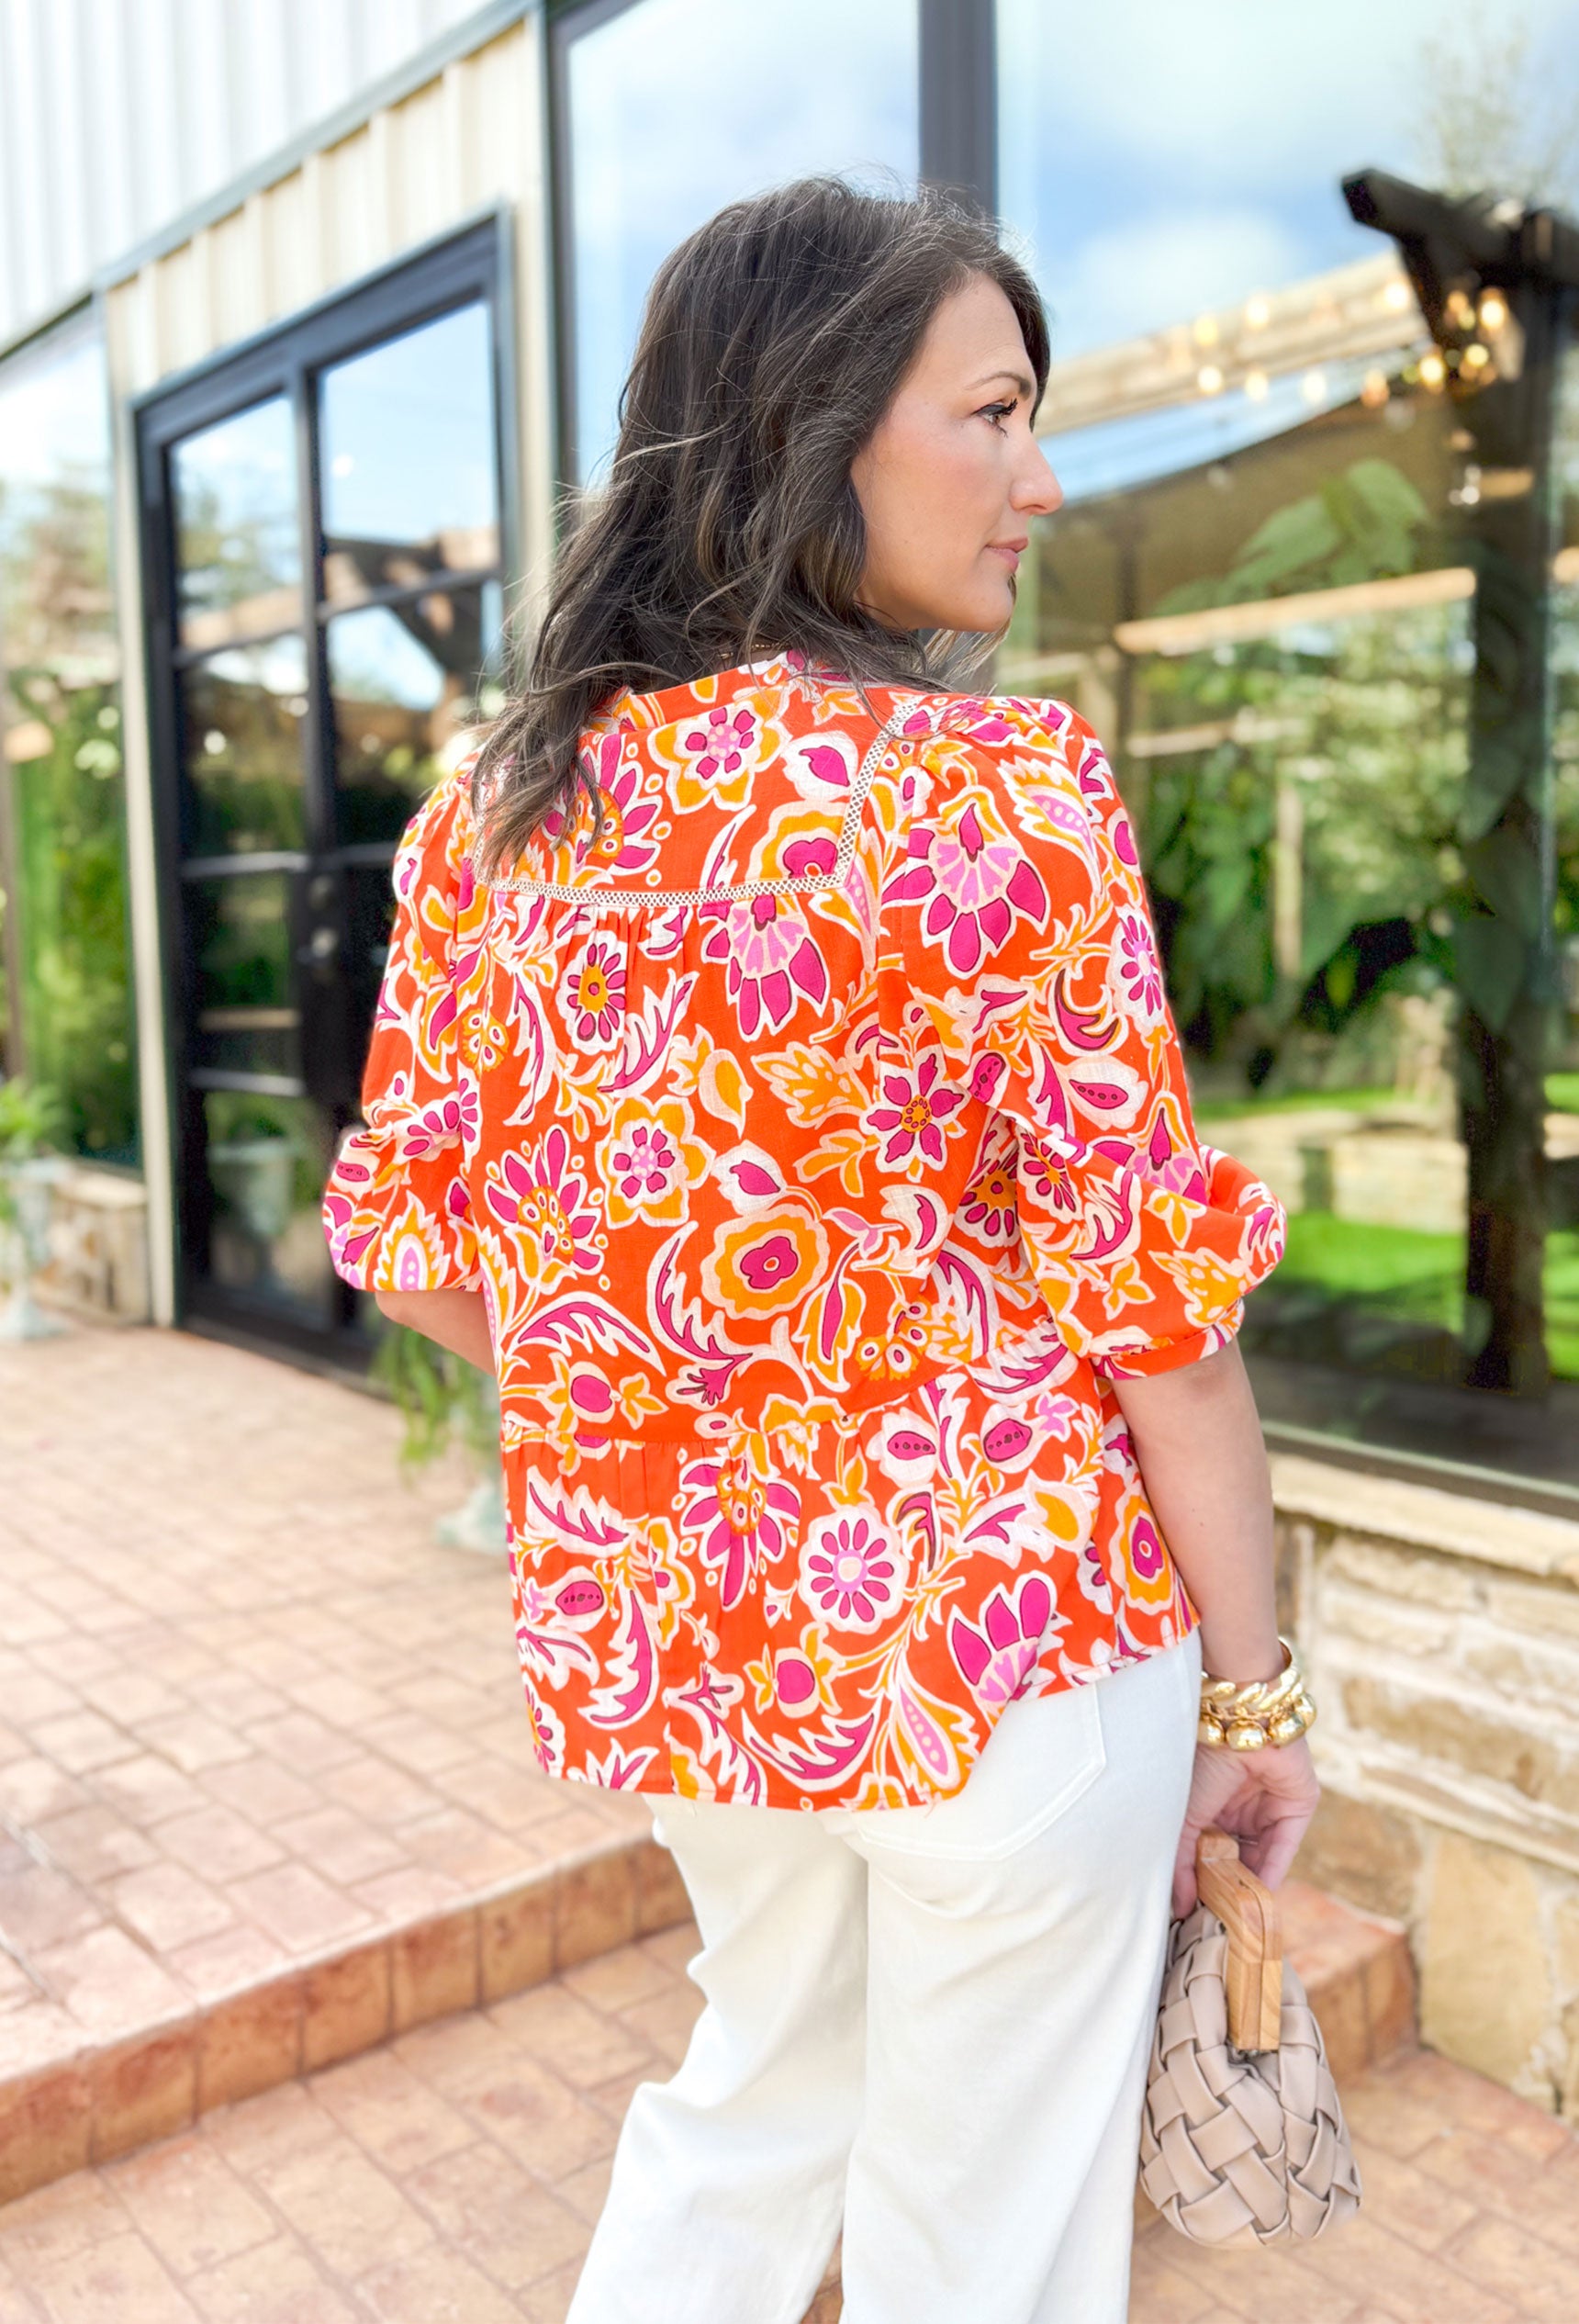 Let's Start Fresh Blouse, hot pink, orange, sunset yellow, and white floral printed quarter sleeve v-neck blouse with white lace detailing across the chest